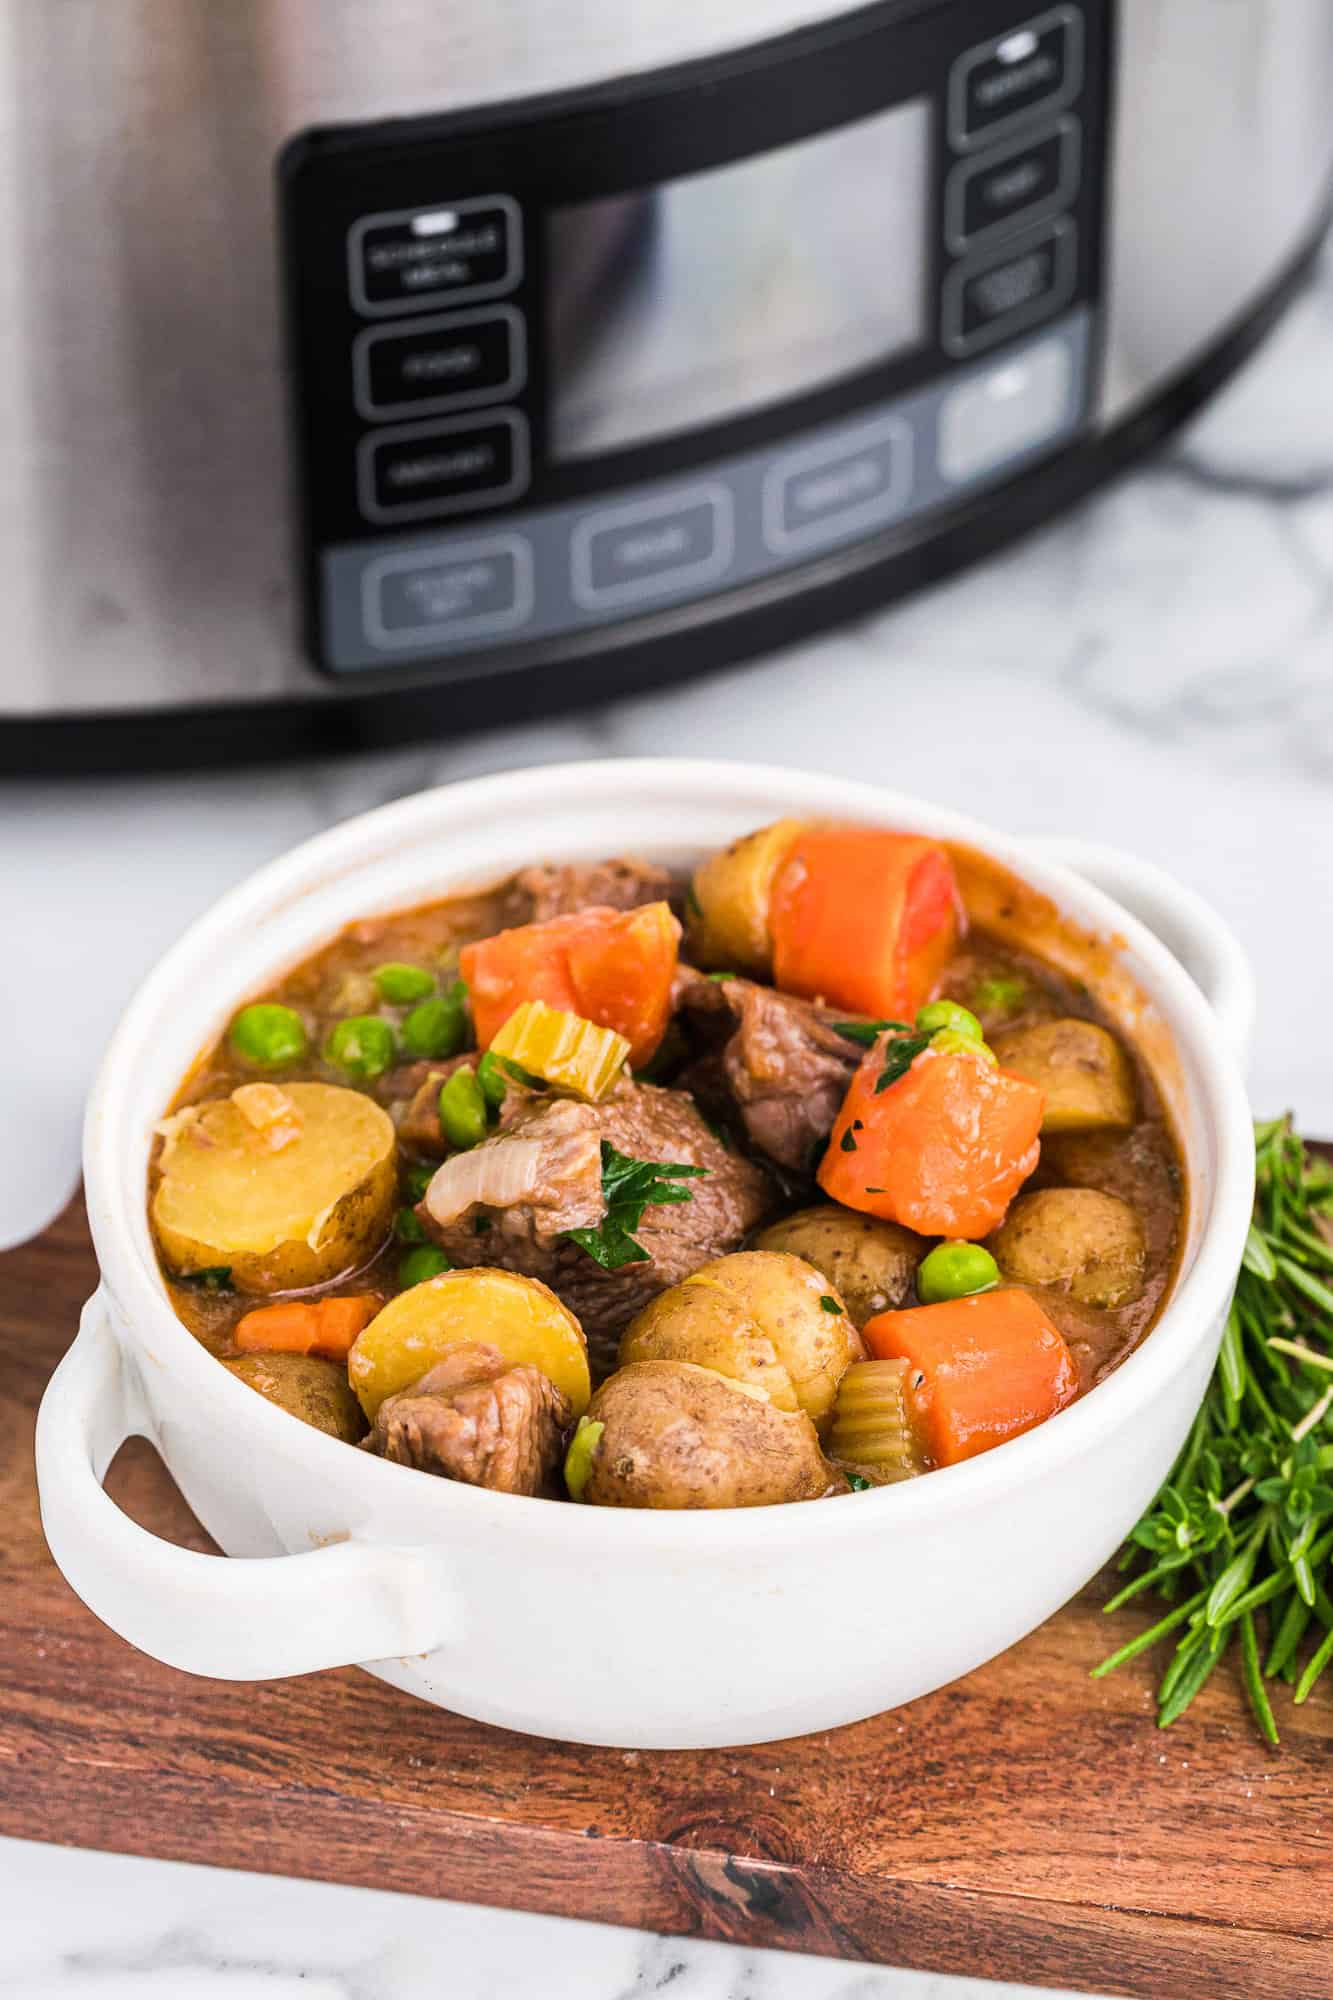 Beef stew with a crockpot in the background.